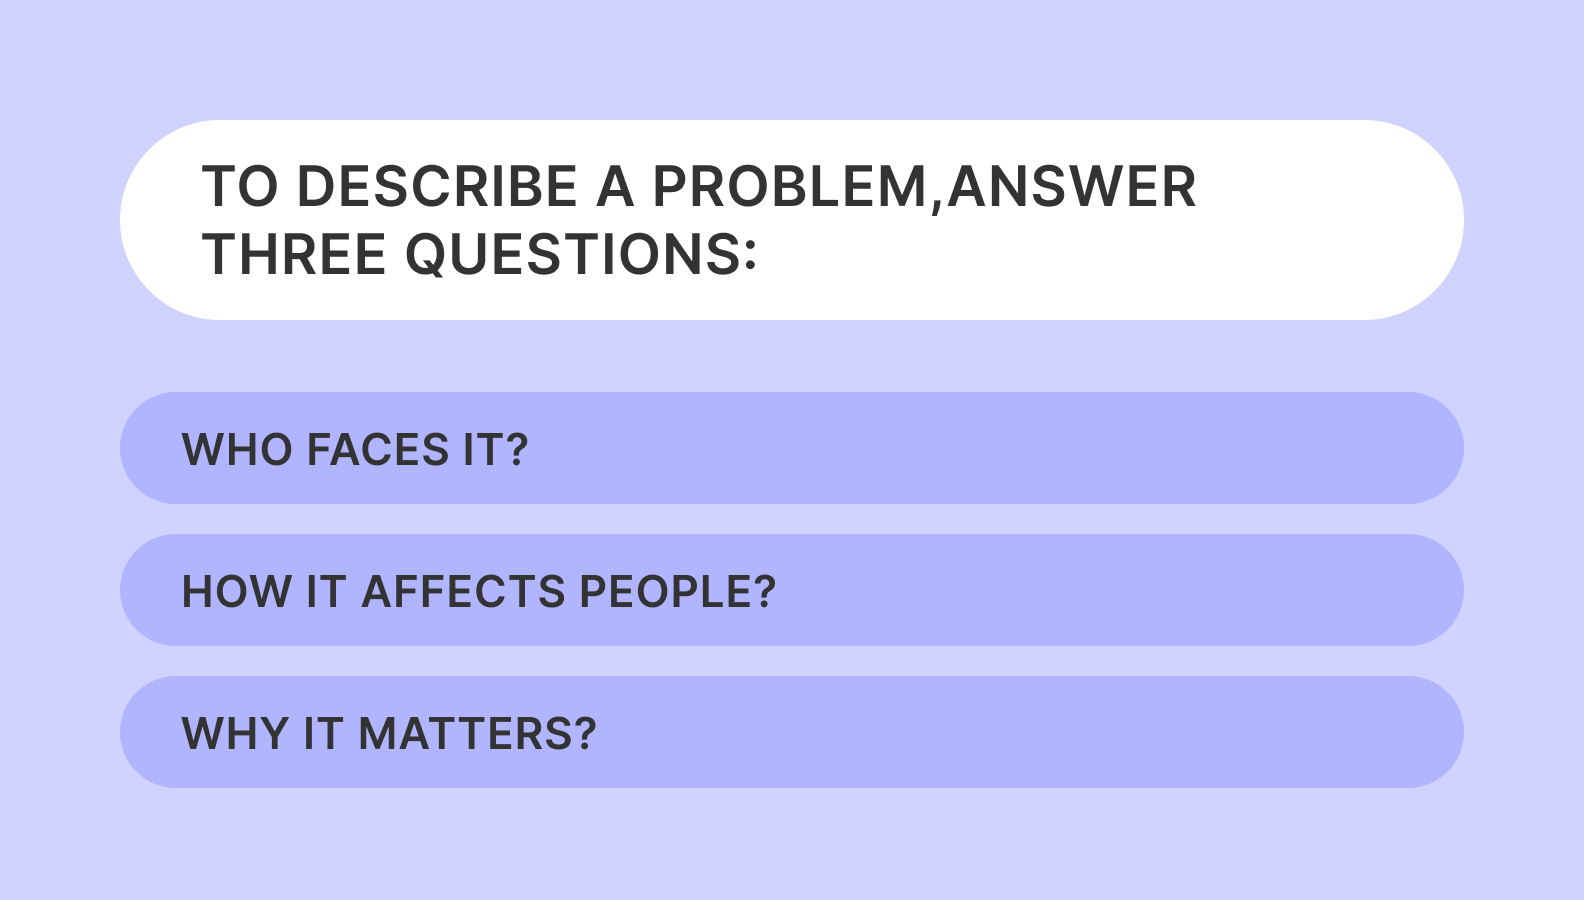 A scheme showing the 3 key questions that help describe a problem that the mobile app will solve